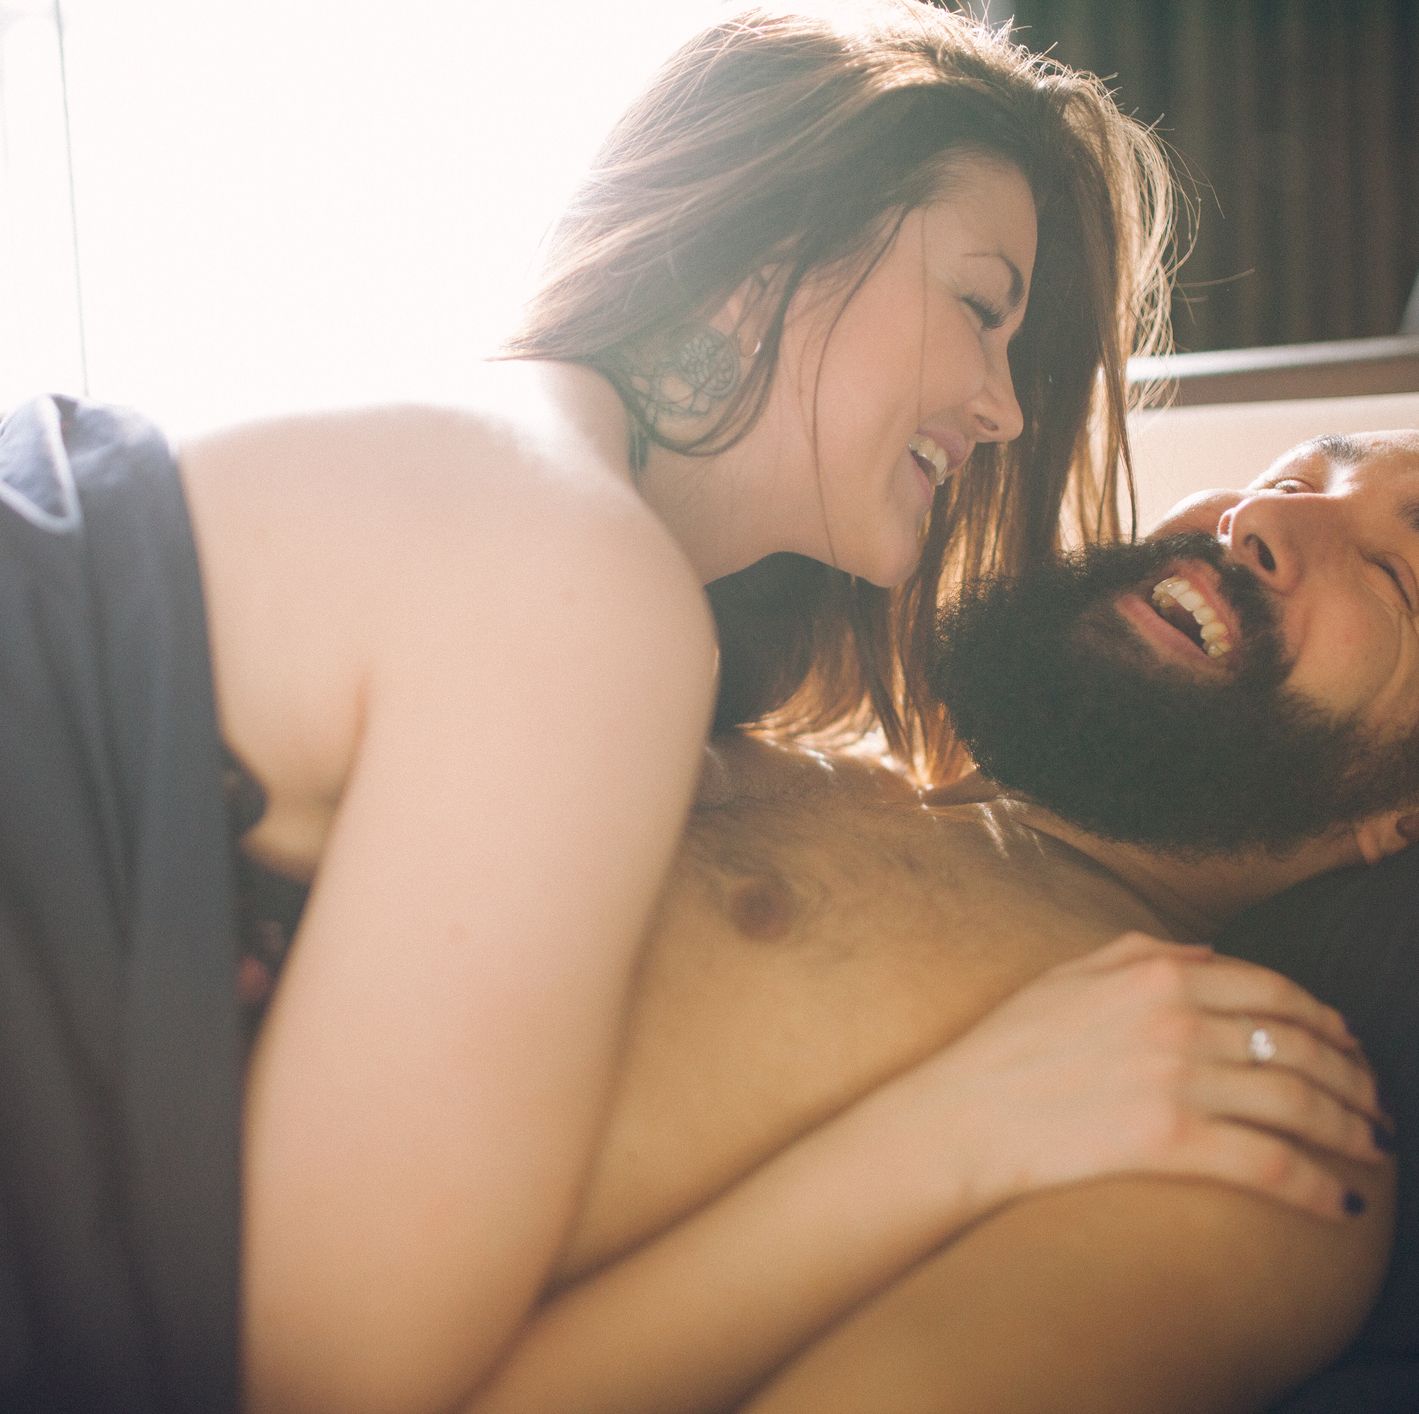 A Urologist Explains What the 'Ideal Duration' of Sex Really Is